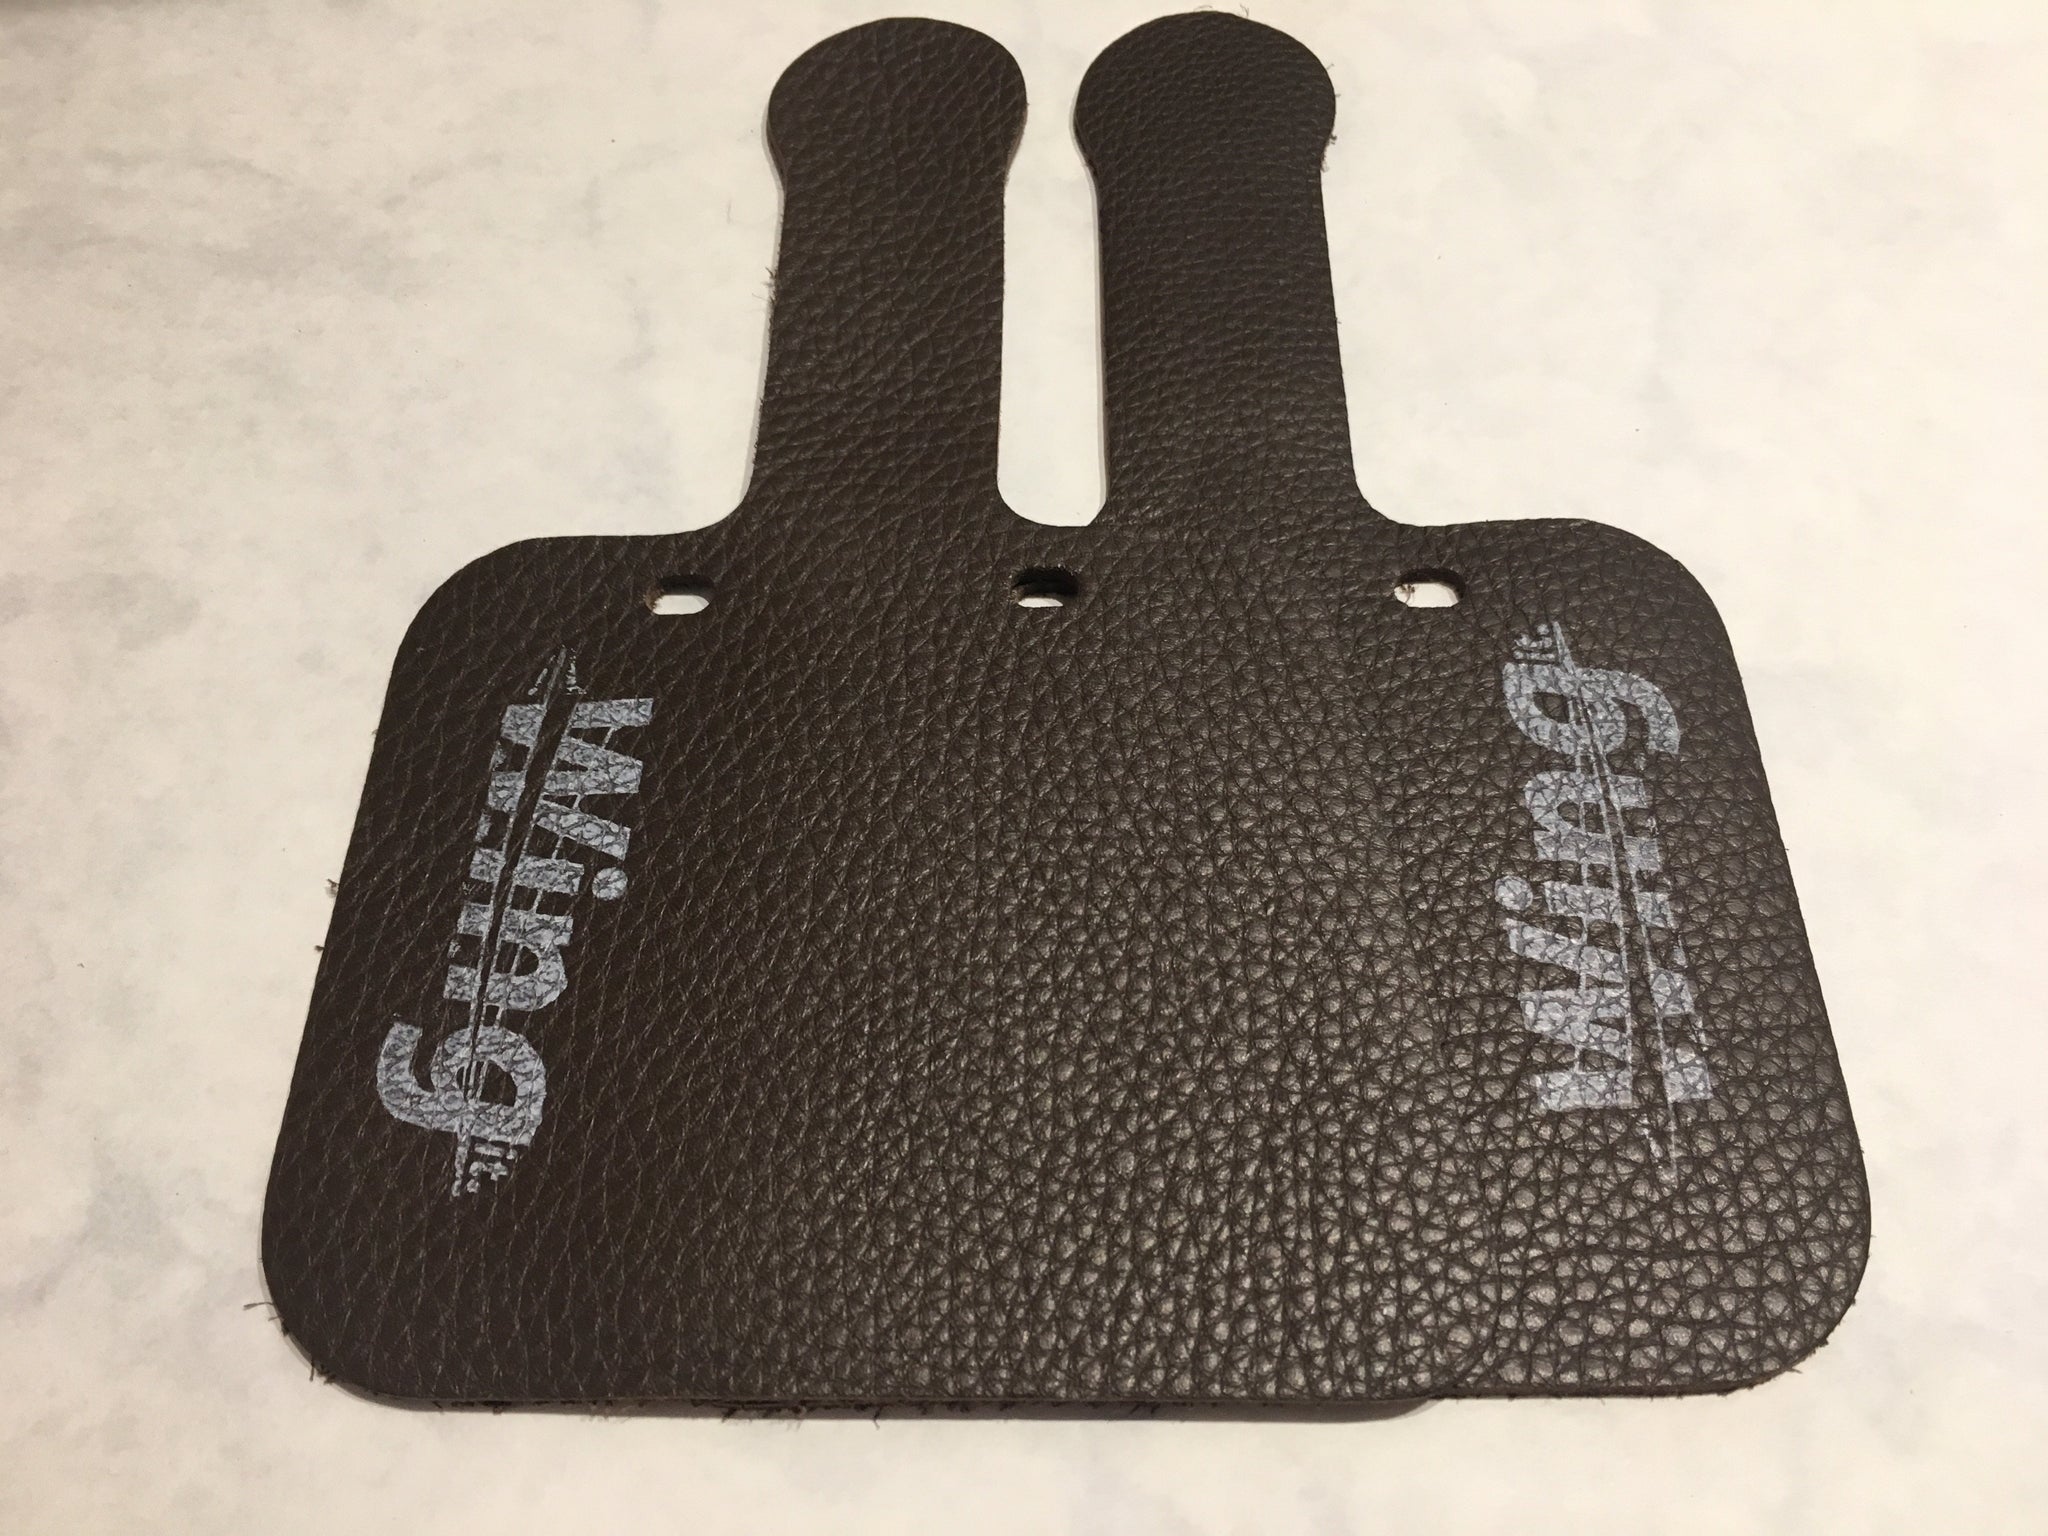 leather boot covers for welding